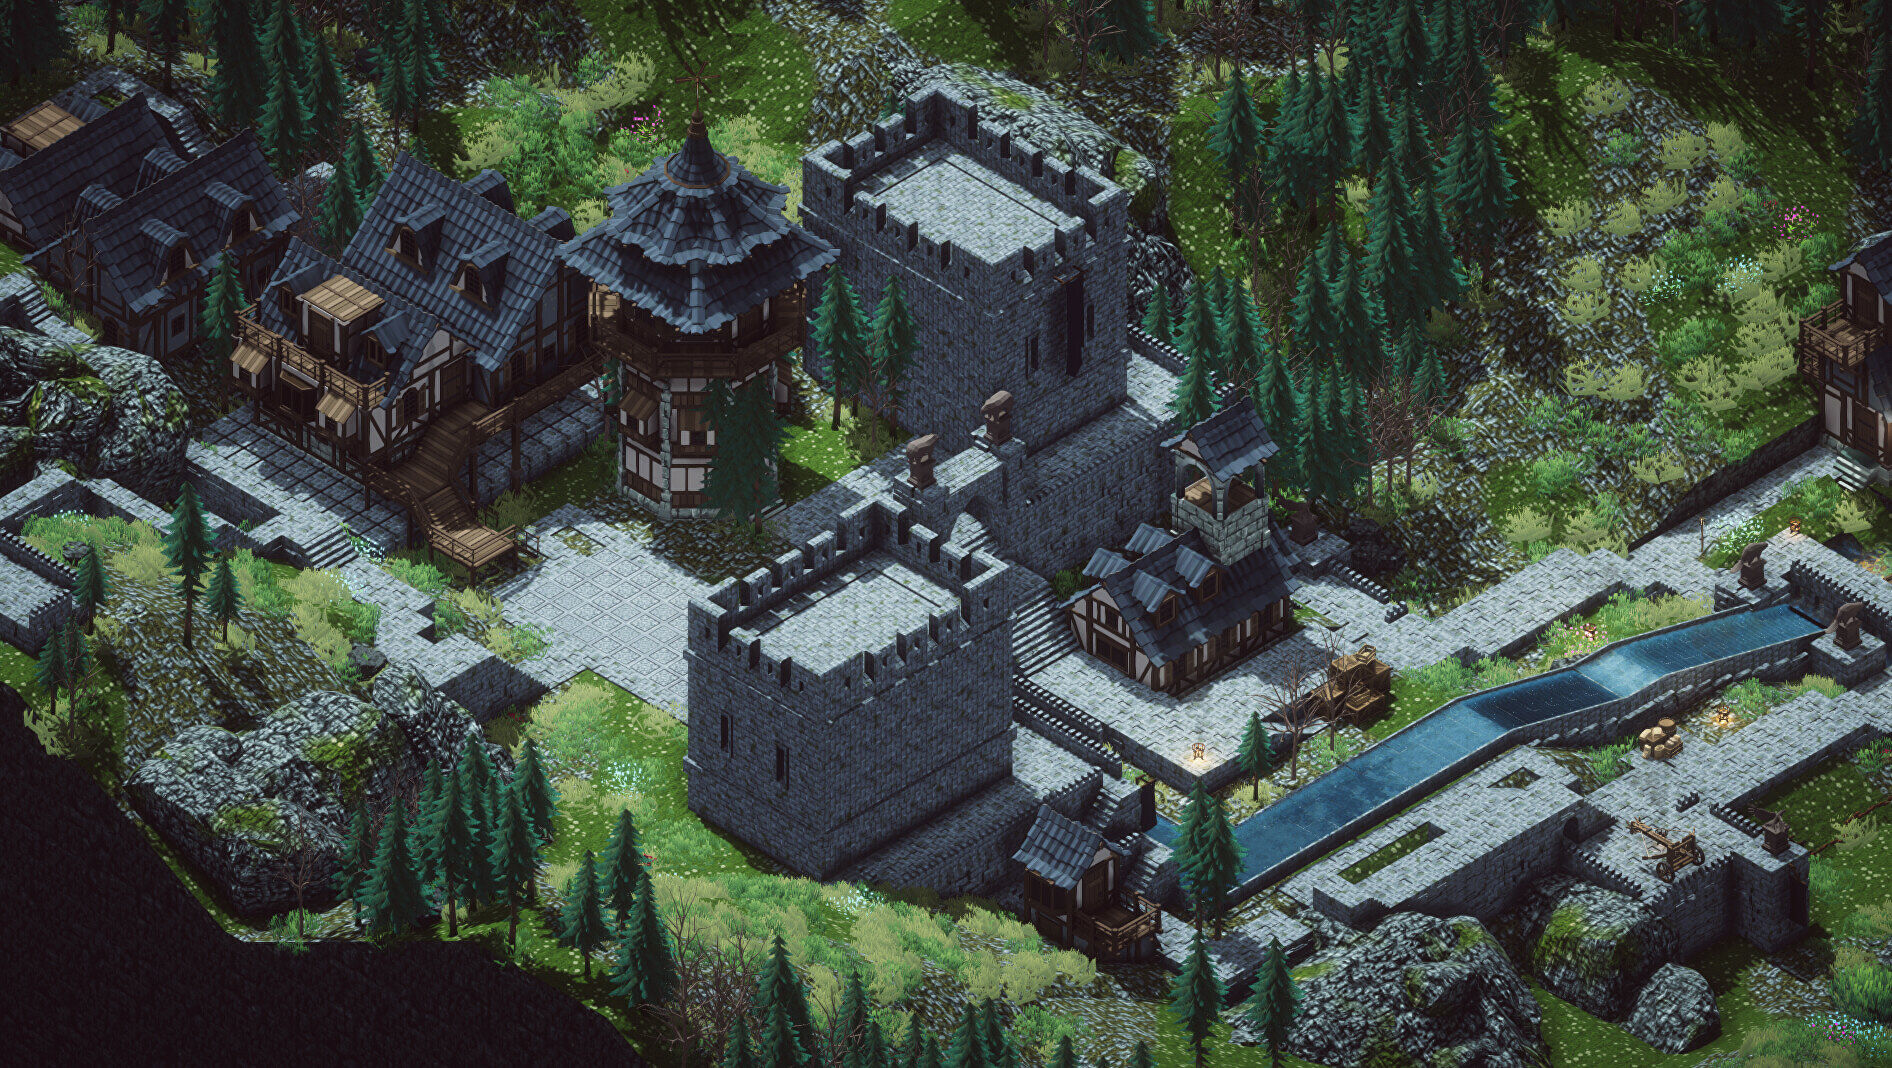 Earth Of Oryn is a citybuilder with Banished and RimWorld influences